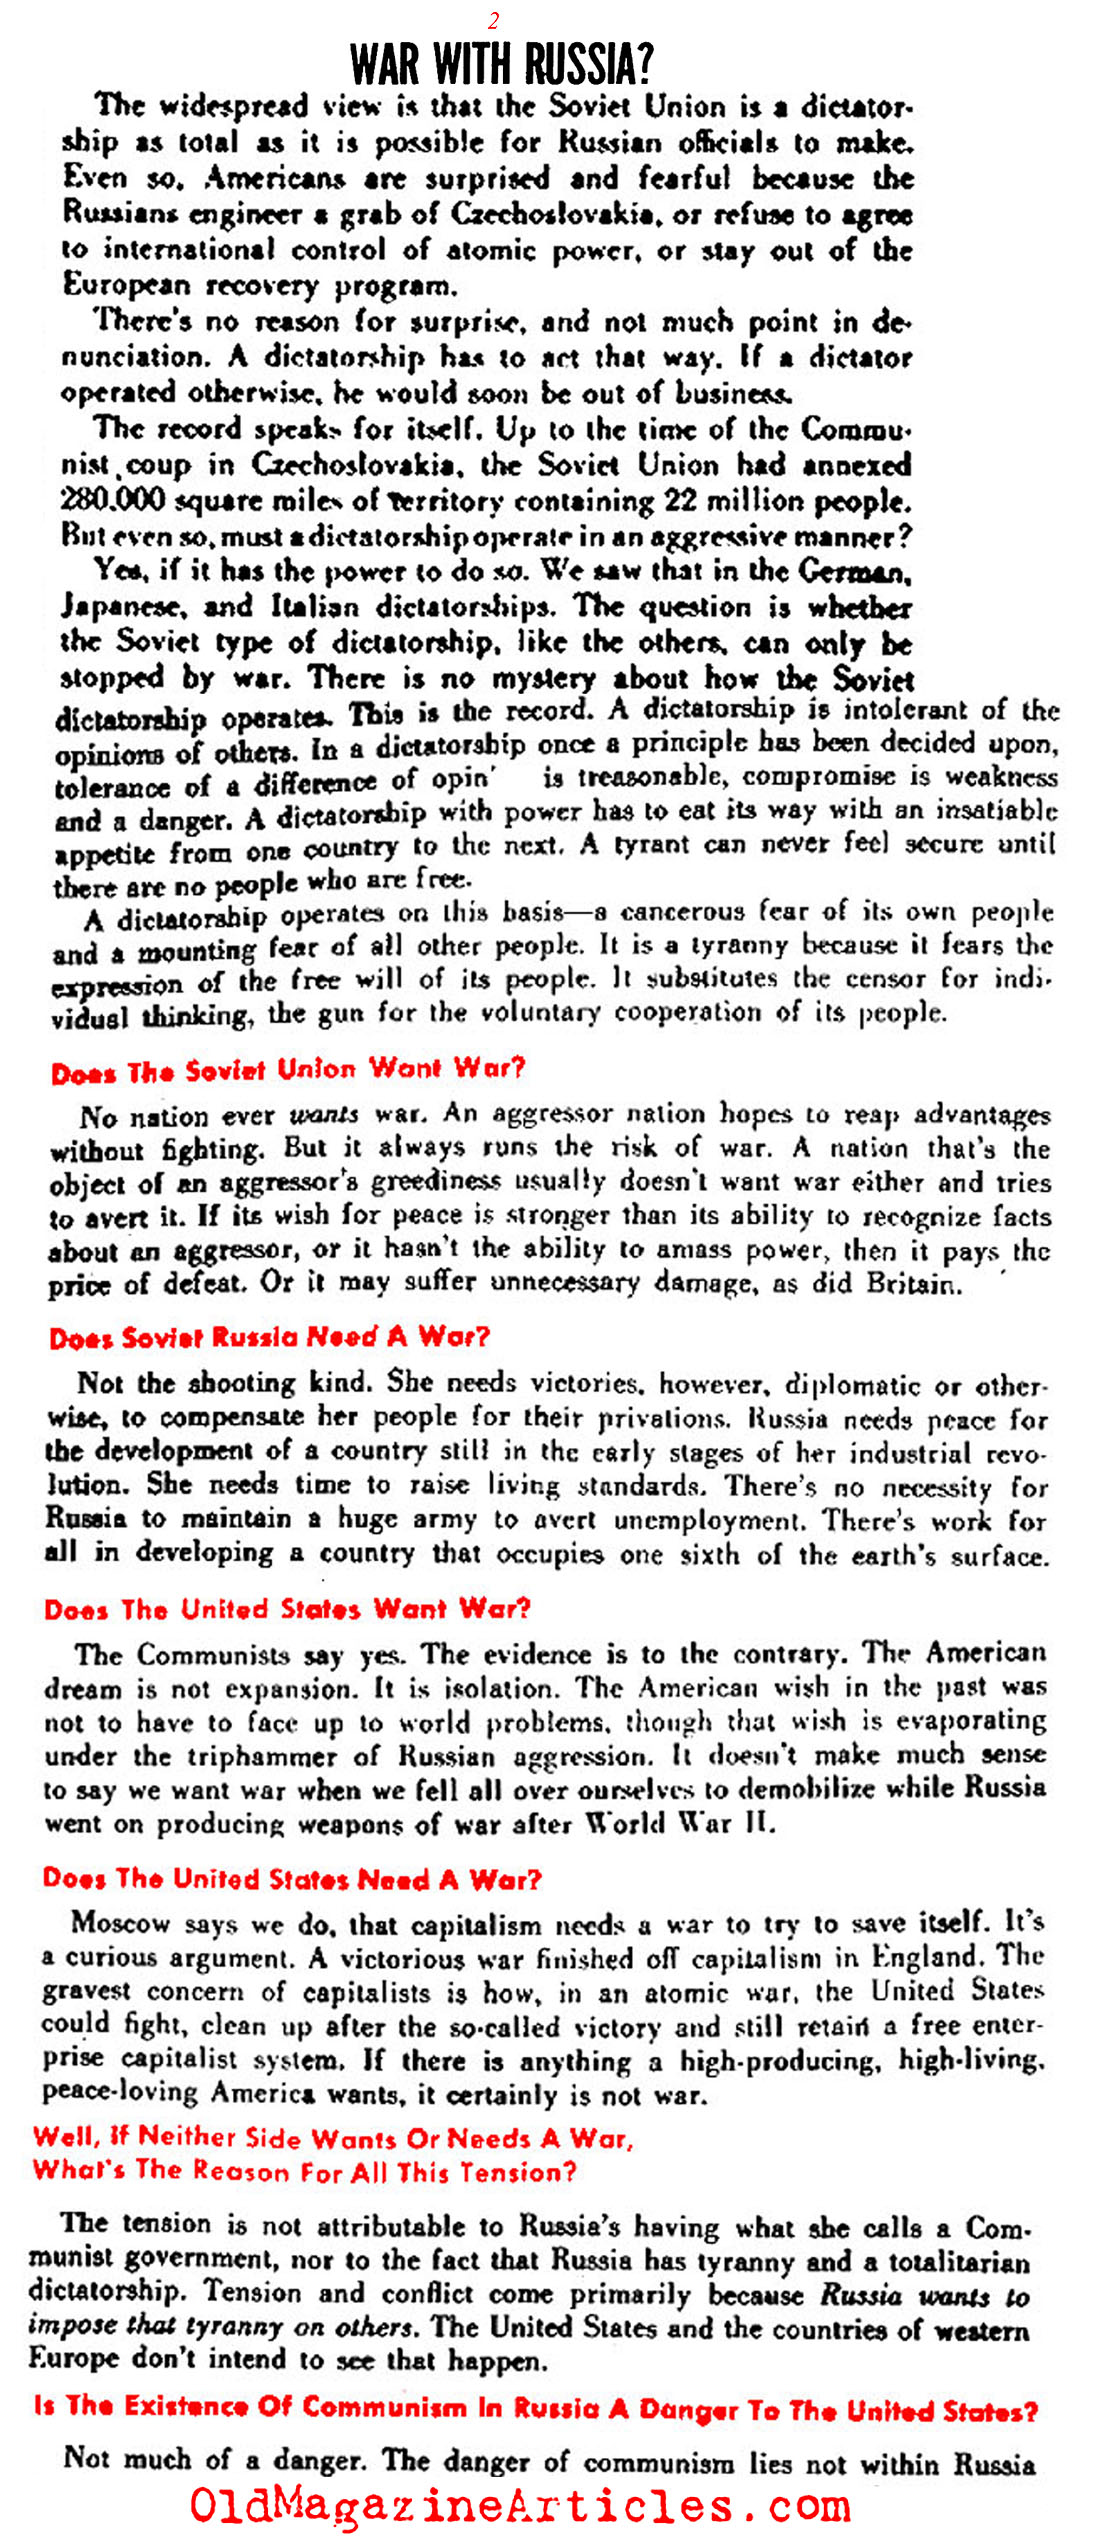 ''How Close are We to War with Russia?'' (See Magazine, 1948)